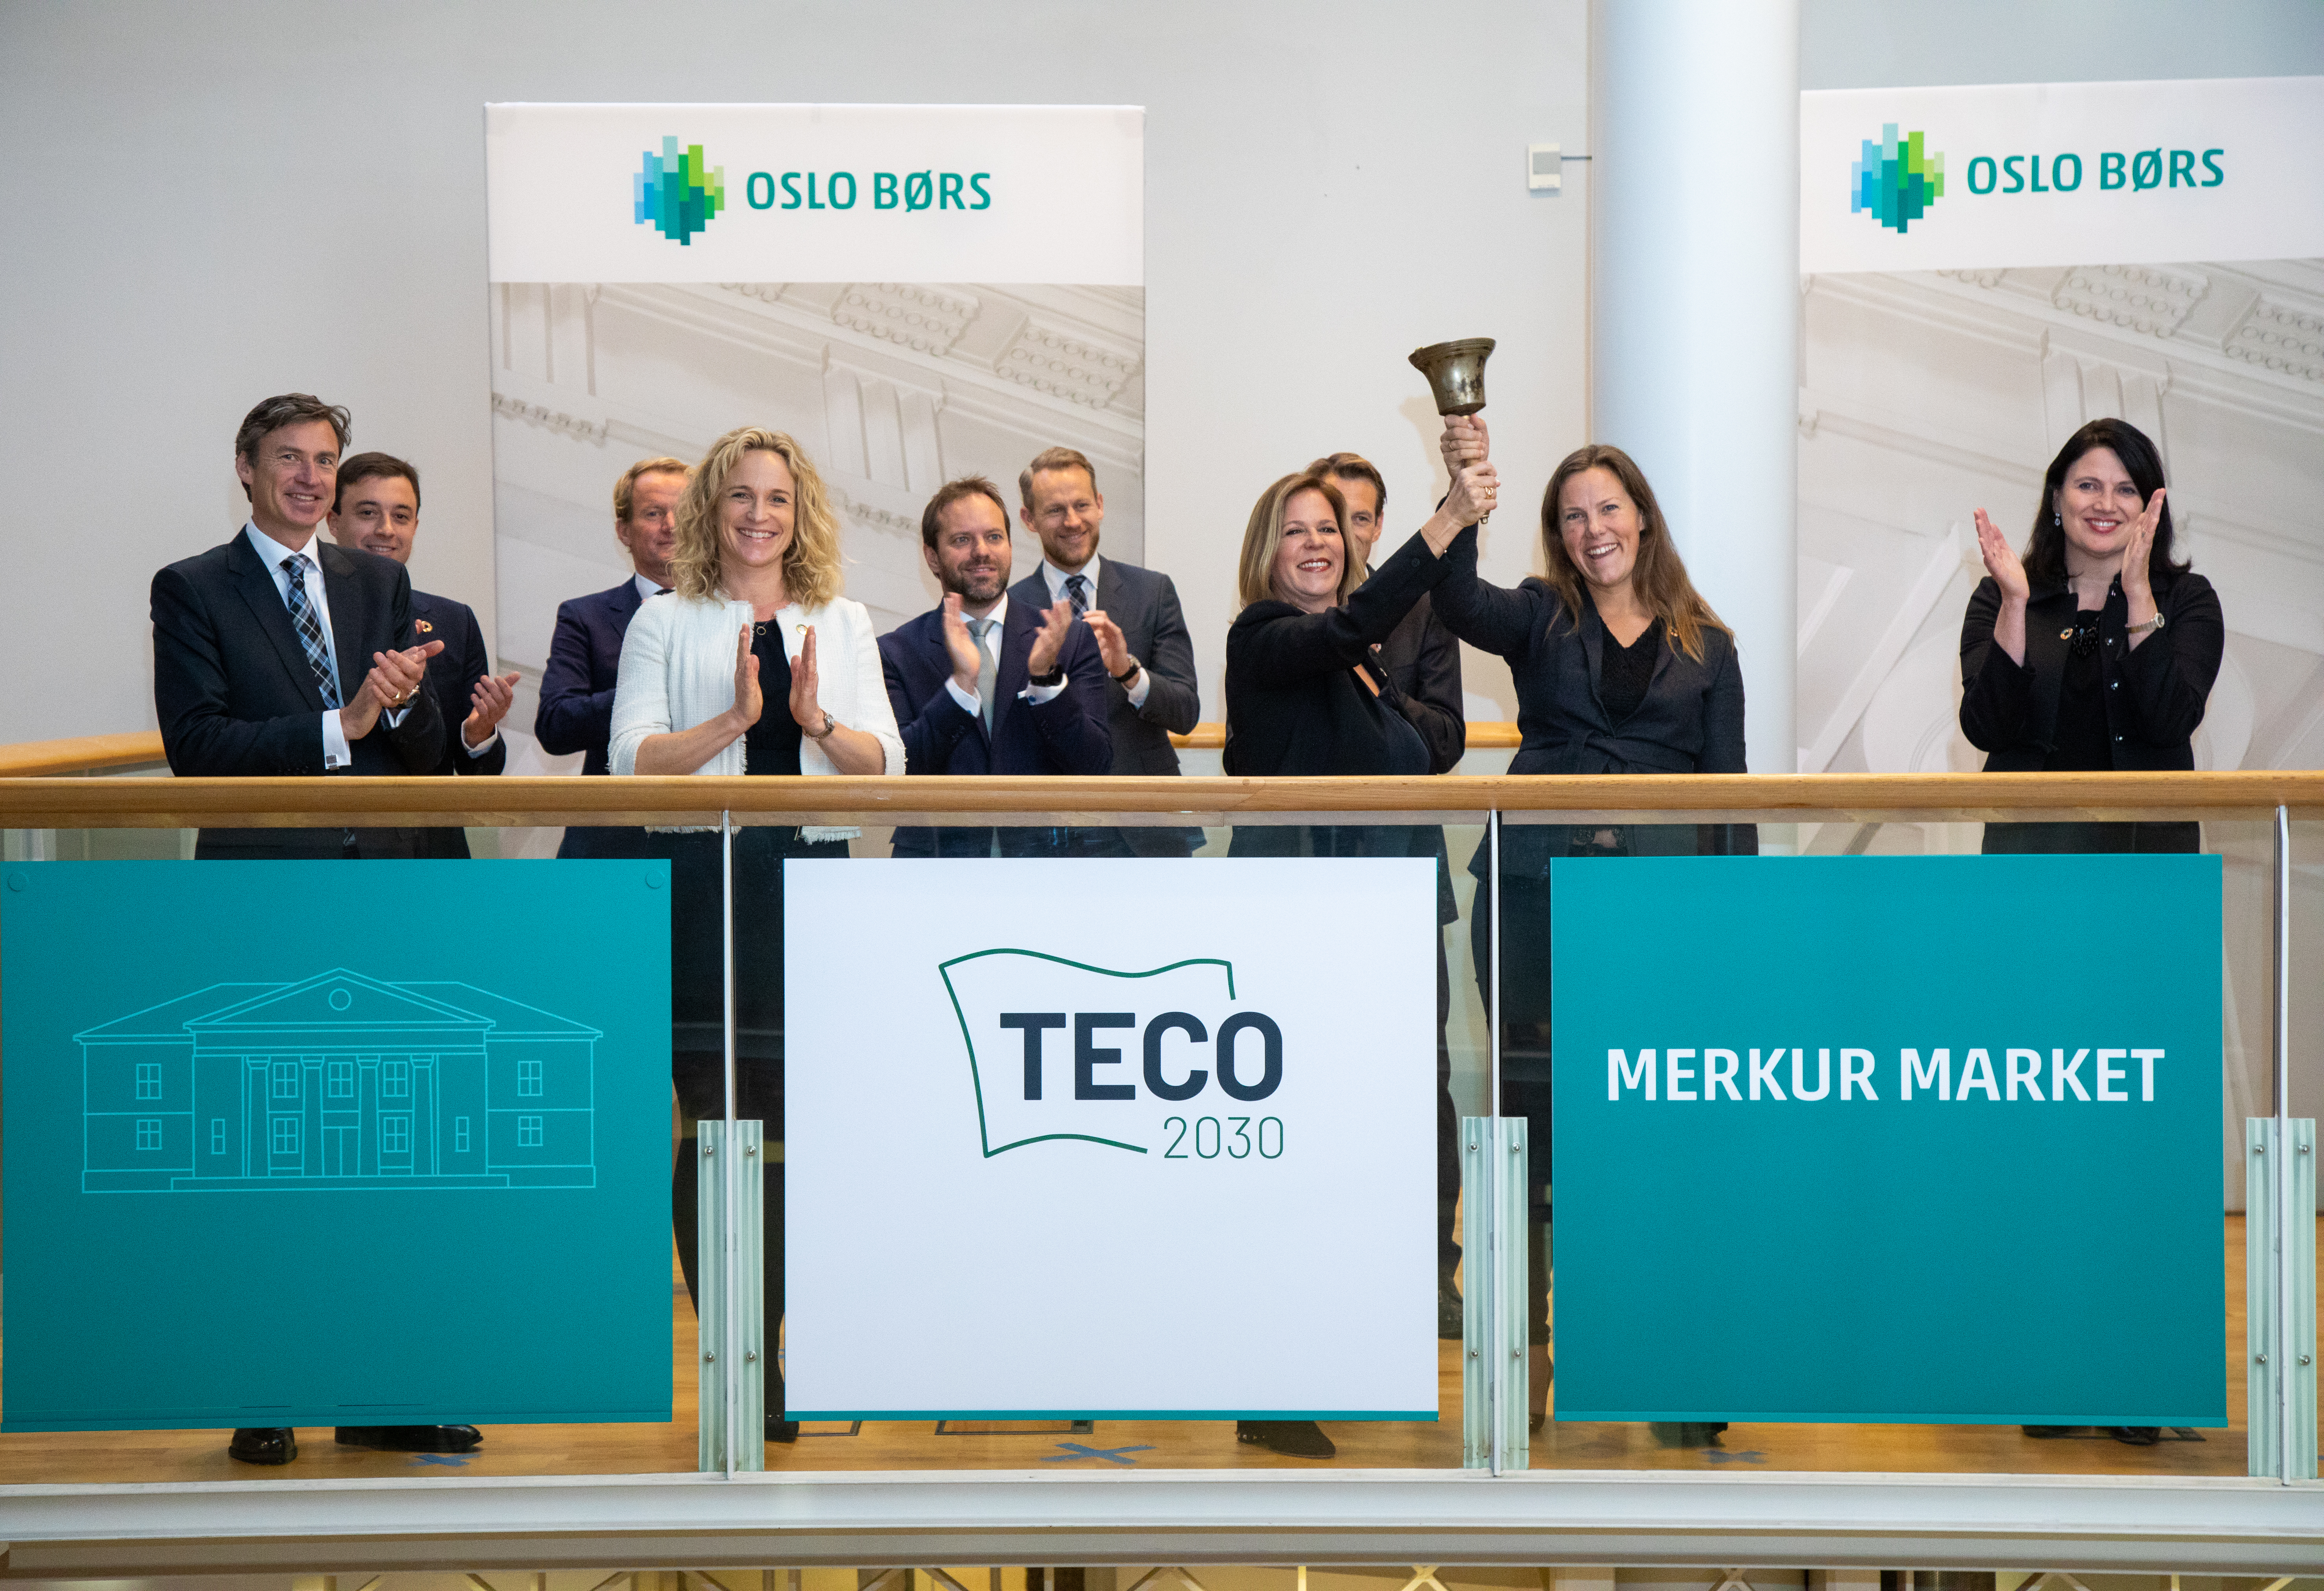 Oslo, Norway, October 12 2020: TECO 2030 ASA (OSE: TECO-ME) started trading today on Merkur Market, a multilateral trading facility operated by the Oslo Stock Exchange, giving investors an opportunity to invest in the transformation of the world’s shipping fleet to zero emissions. (Foto: Thomas Brun / NTB Kommunikasjon)